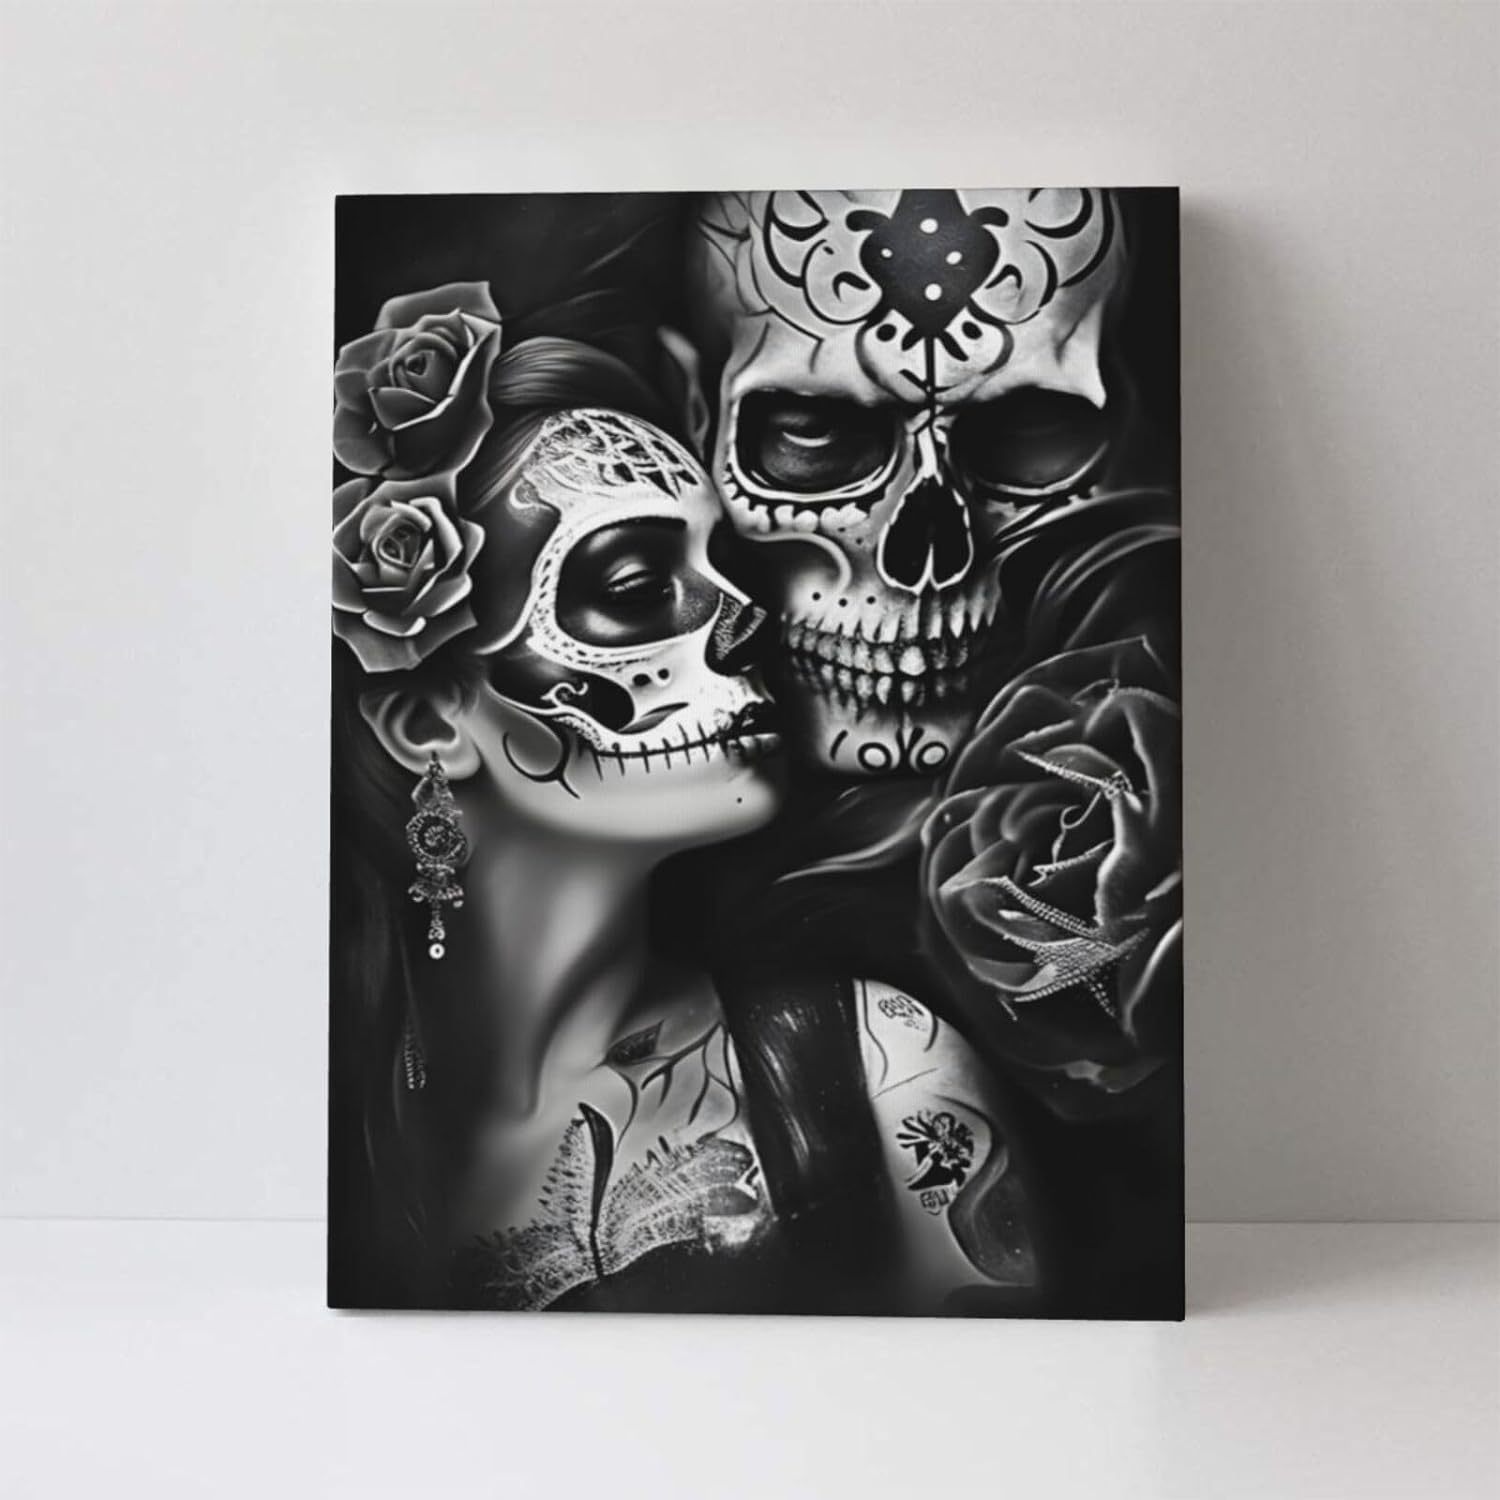 

Black And White Sugar Couple Canvas Prints Wall Art Paintings Wall Artworks Gothic Pictures Decor For Living Room Bedroom Decoration Day Of The Dead Aesthetic Decor 12x16inch